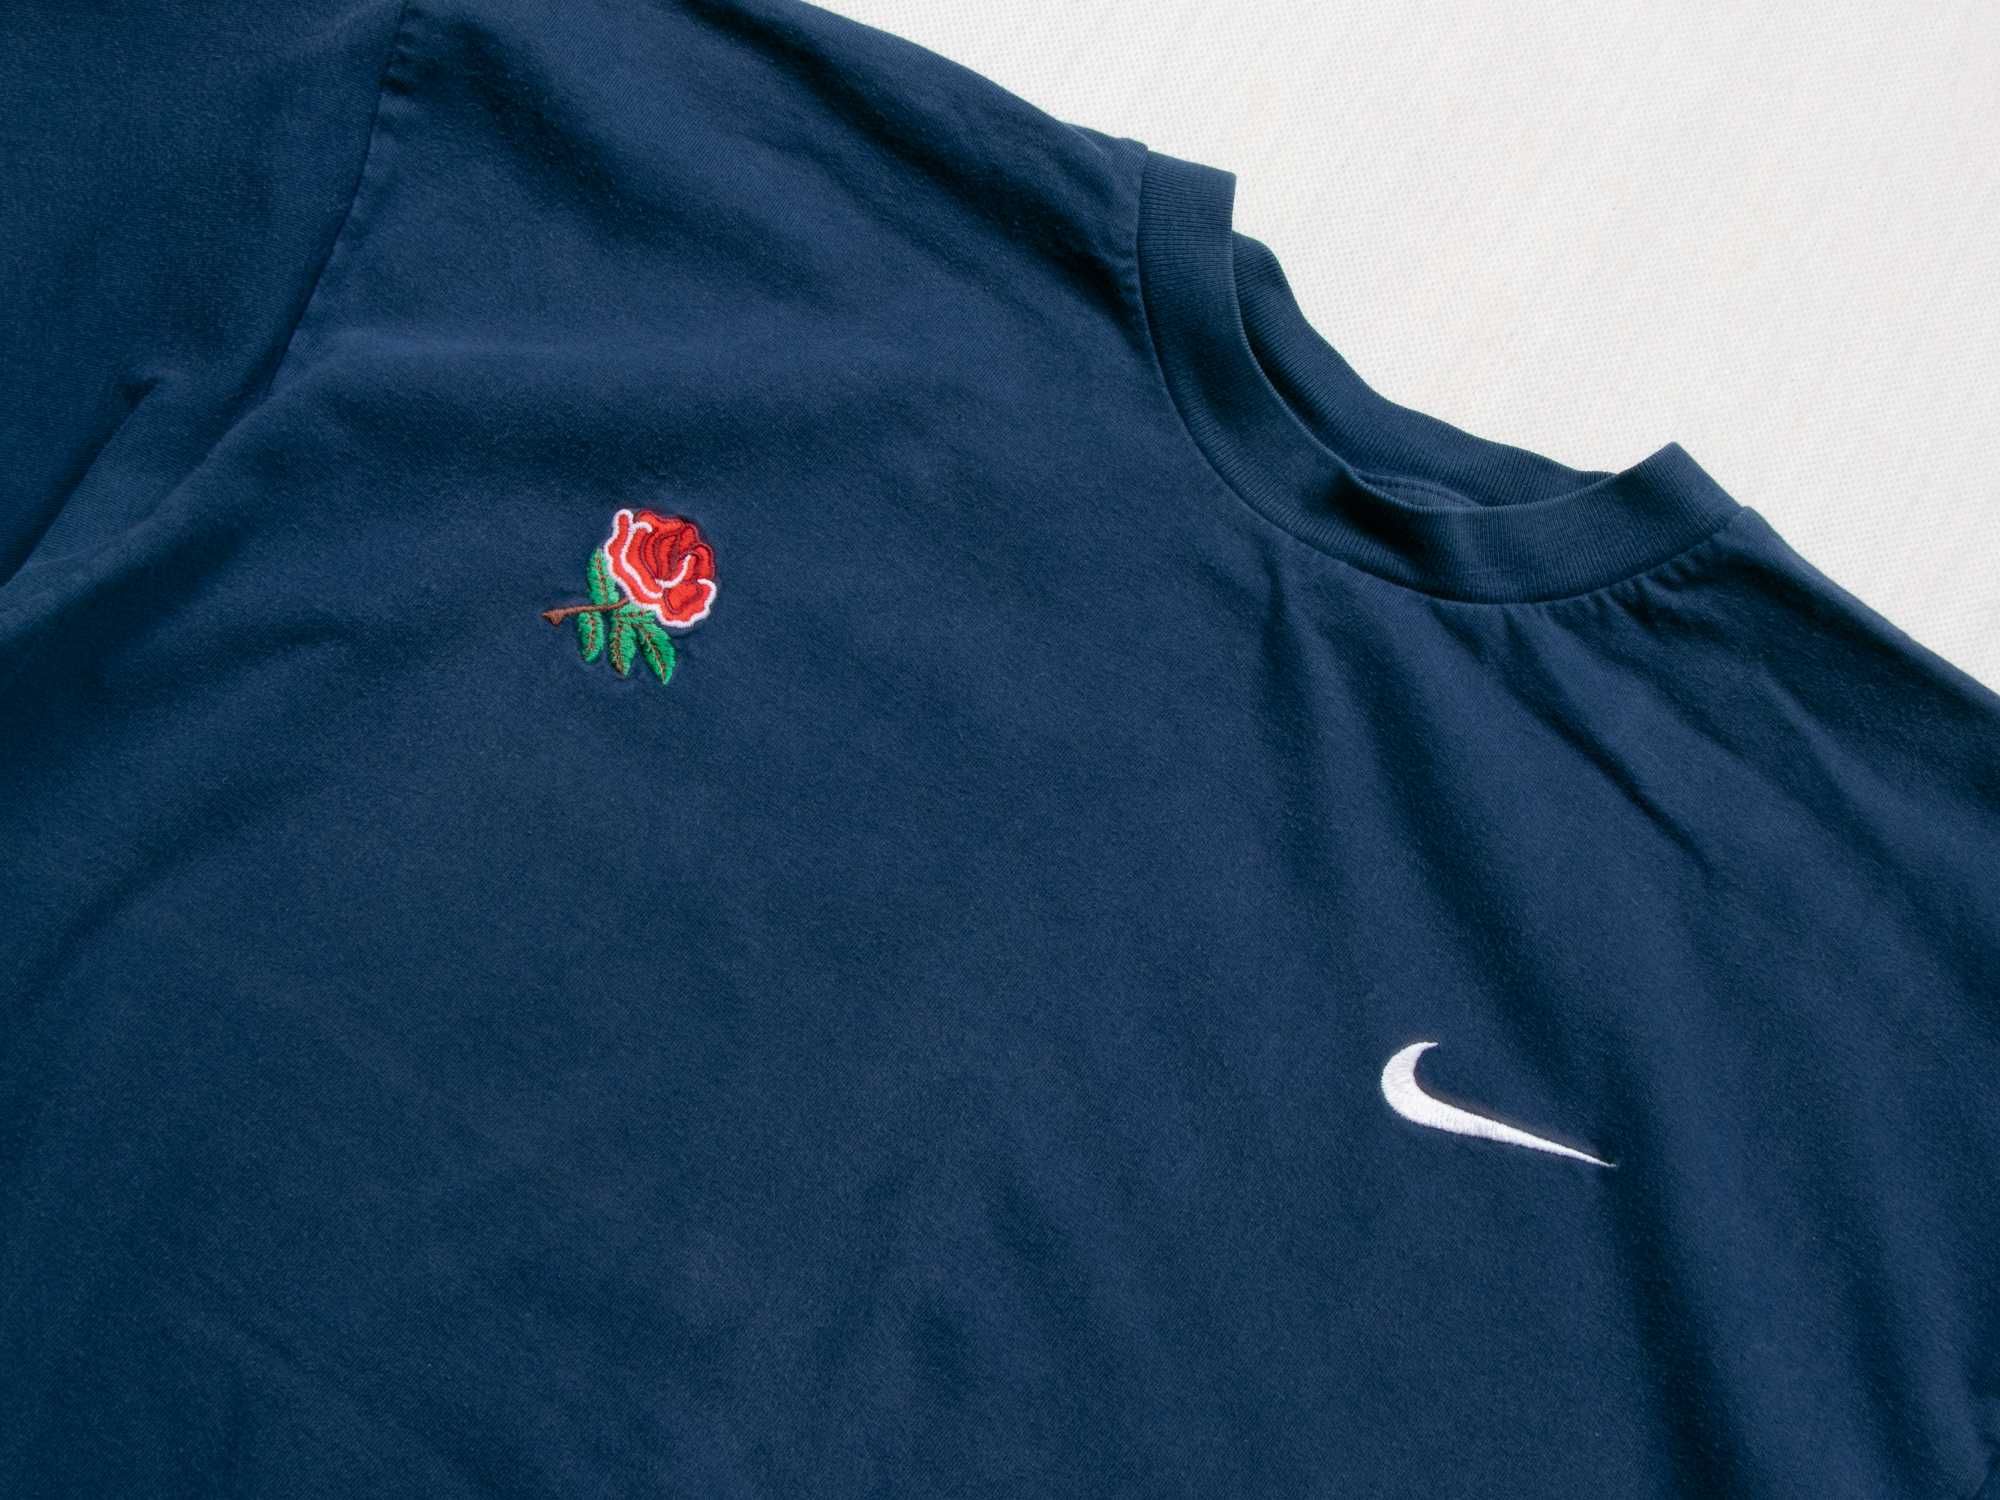 T-shirt Nike Anglia rugby L made in UK